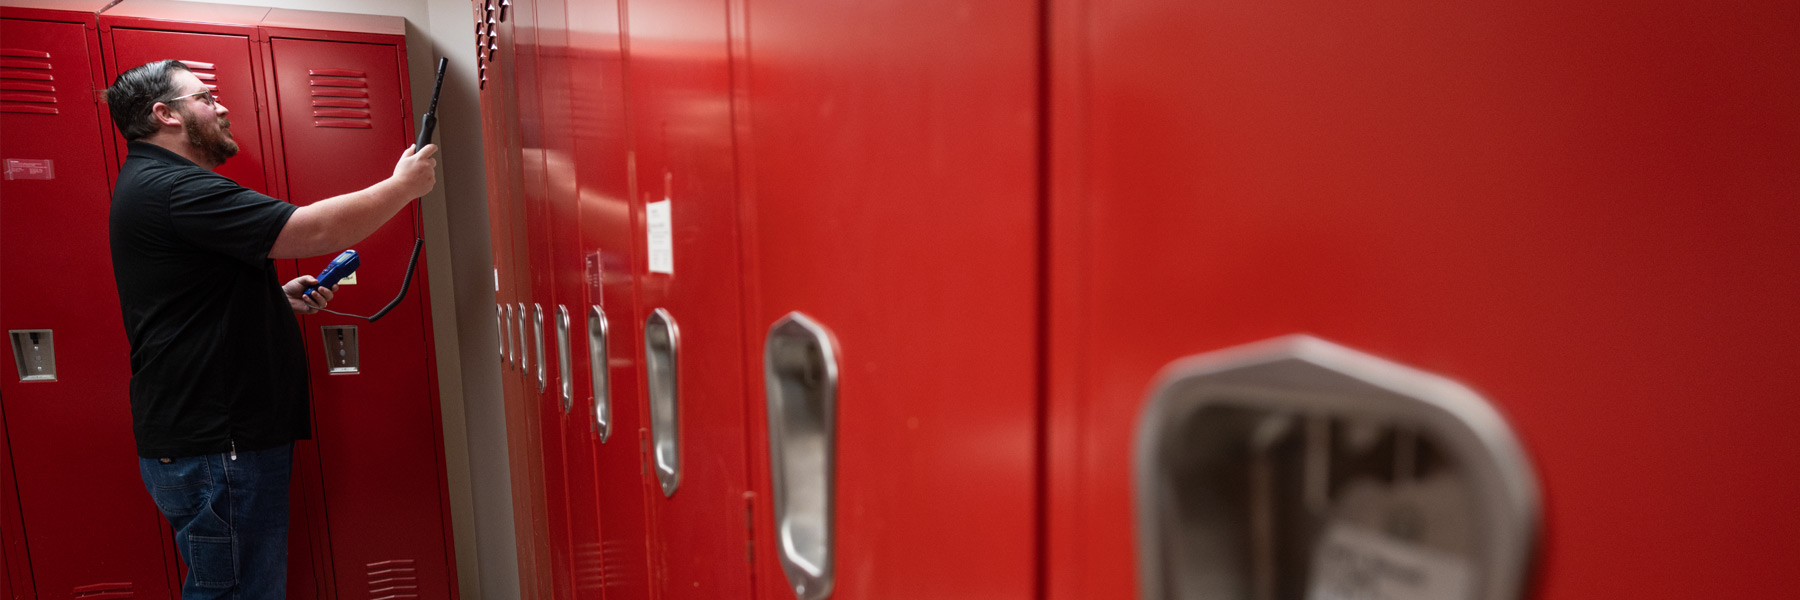 A row of IU lockers, forming a bright red, angular composition drawing the viewer's line of sight directly to the EHS worker inspecting them. 